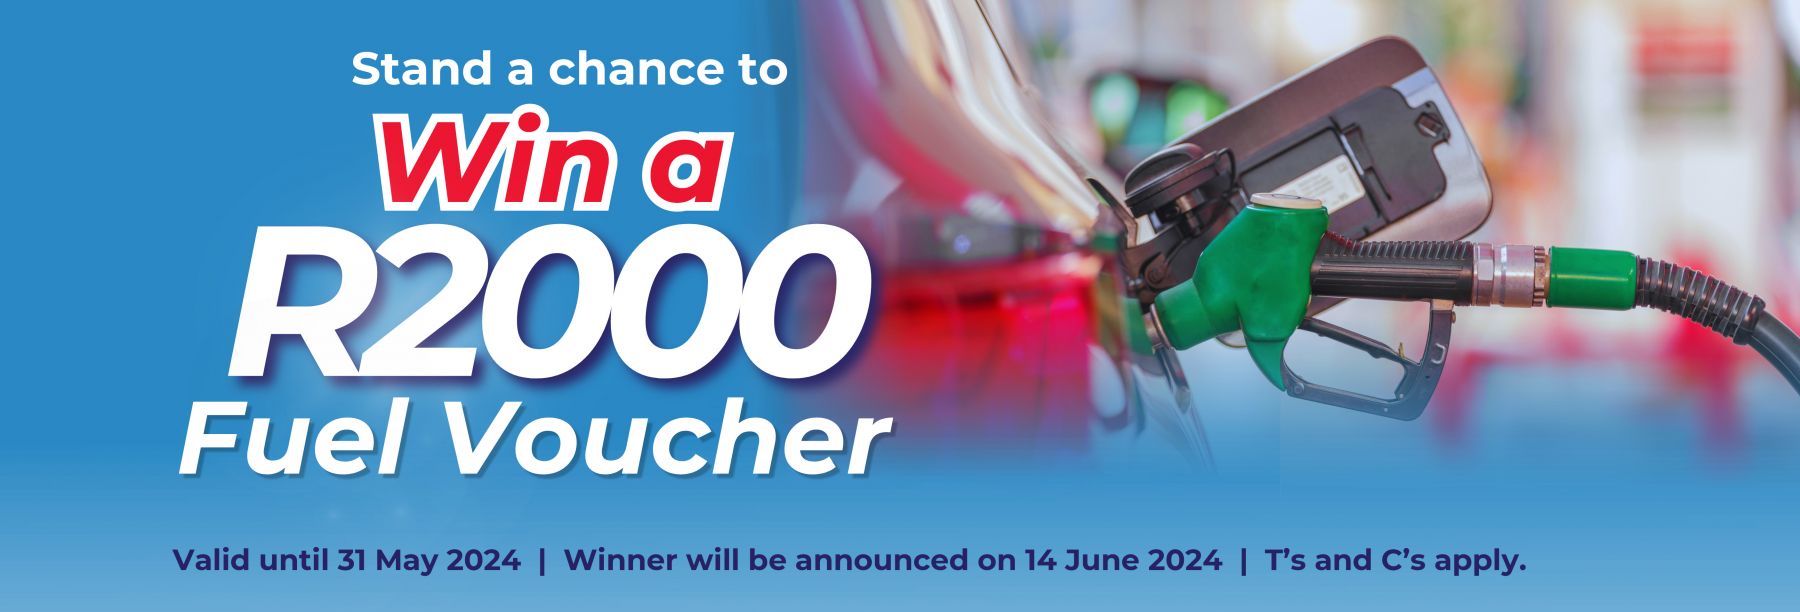 Stand a chance to win a R2000 Fuel voucher